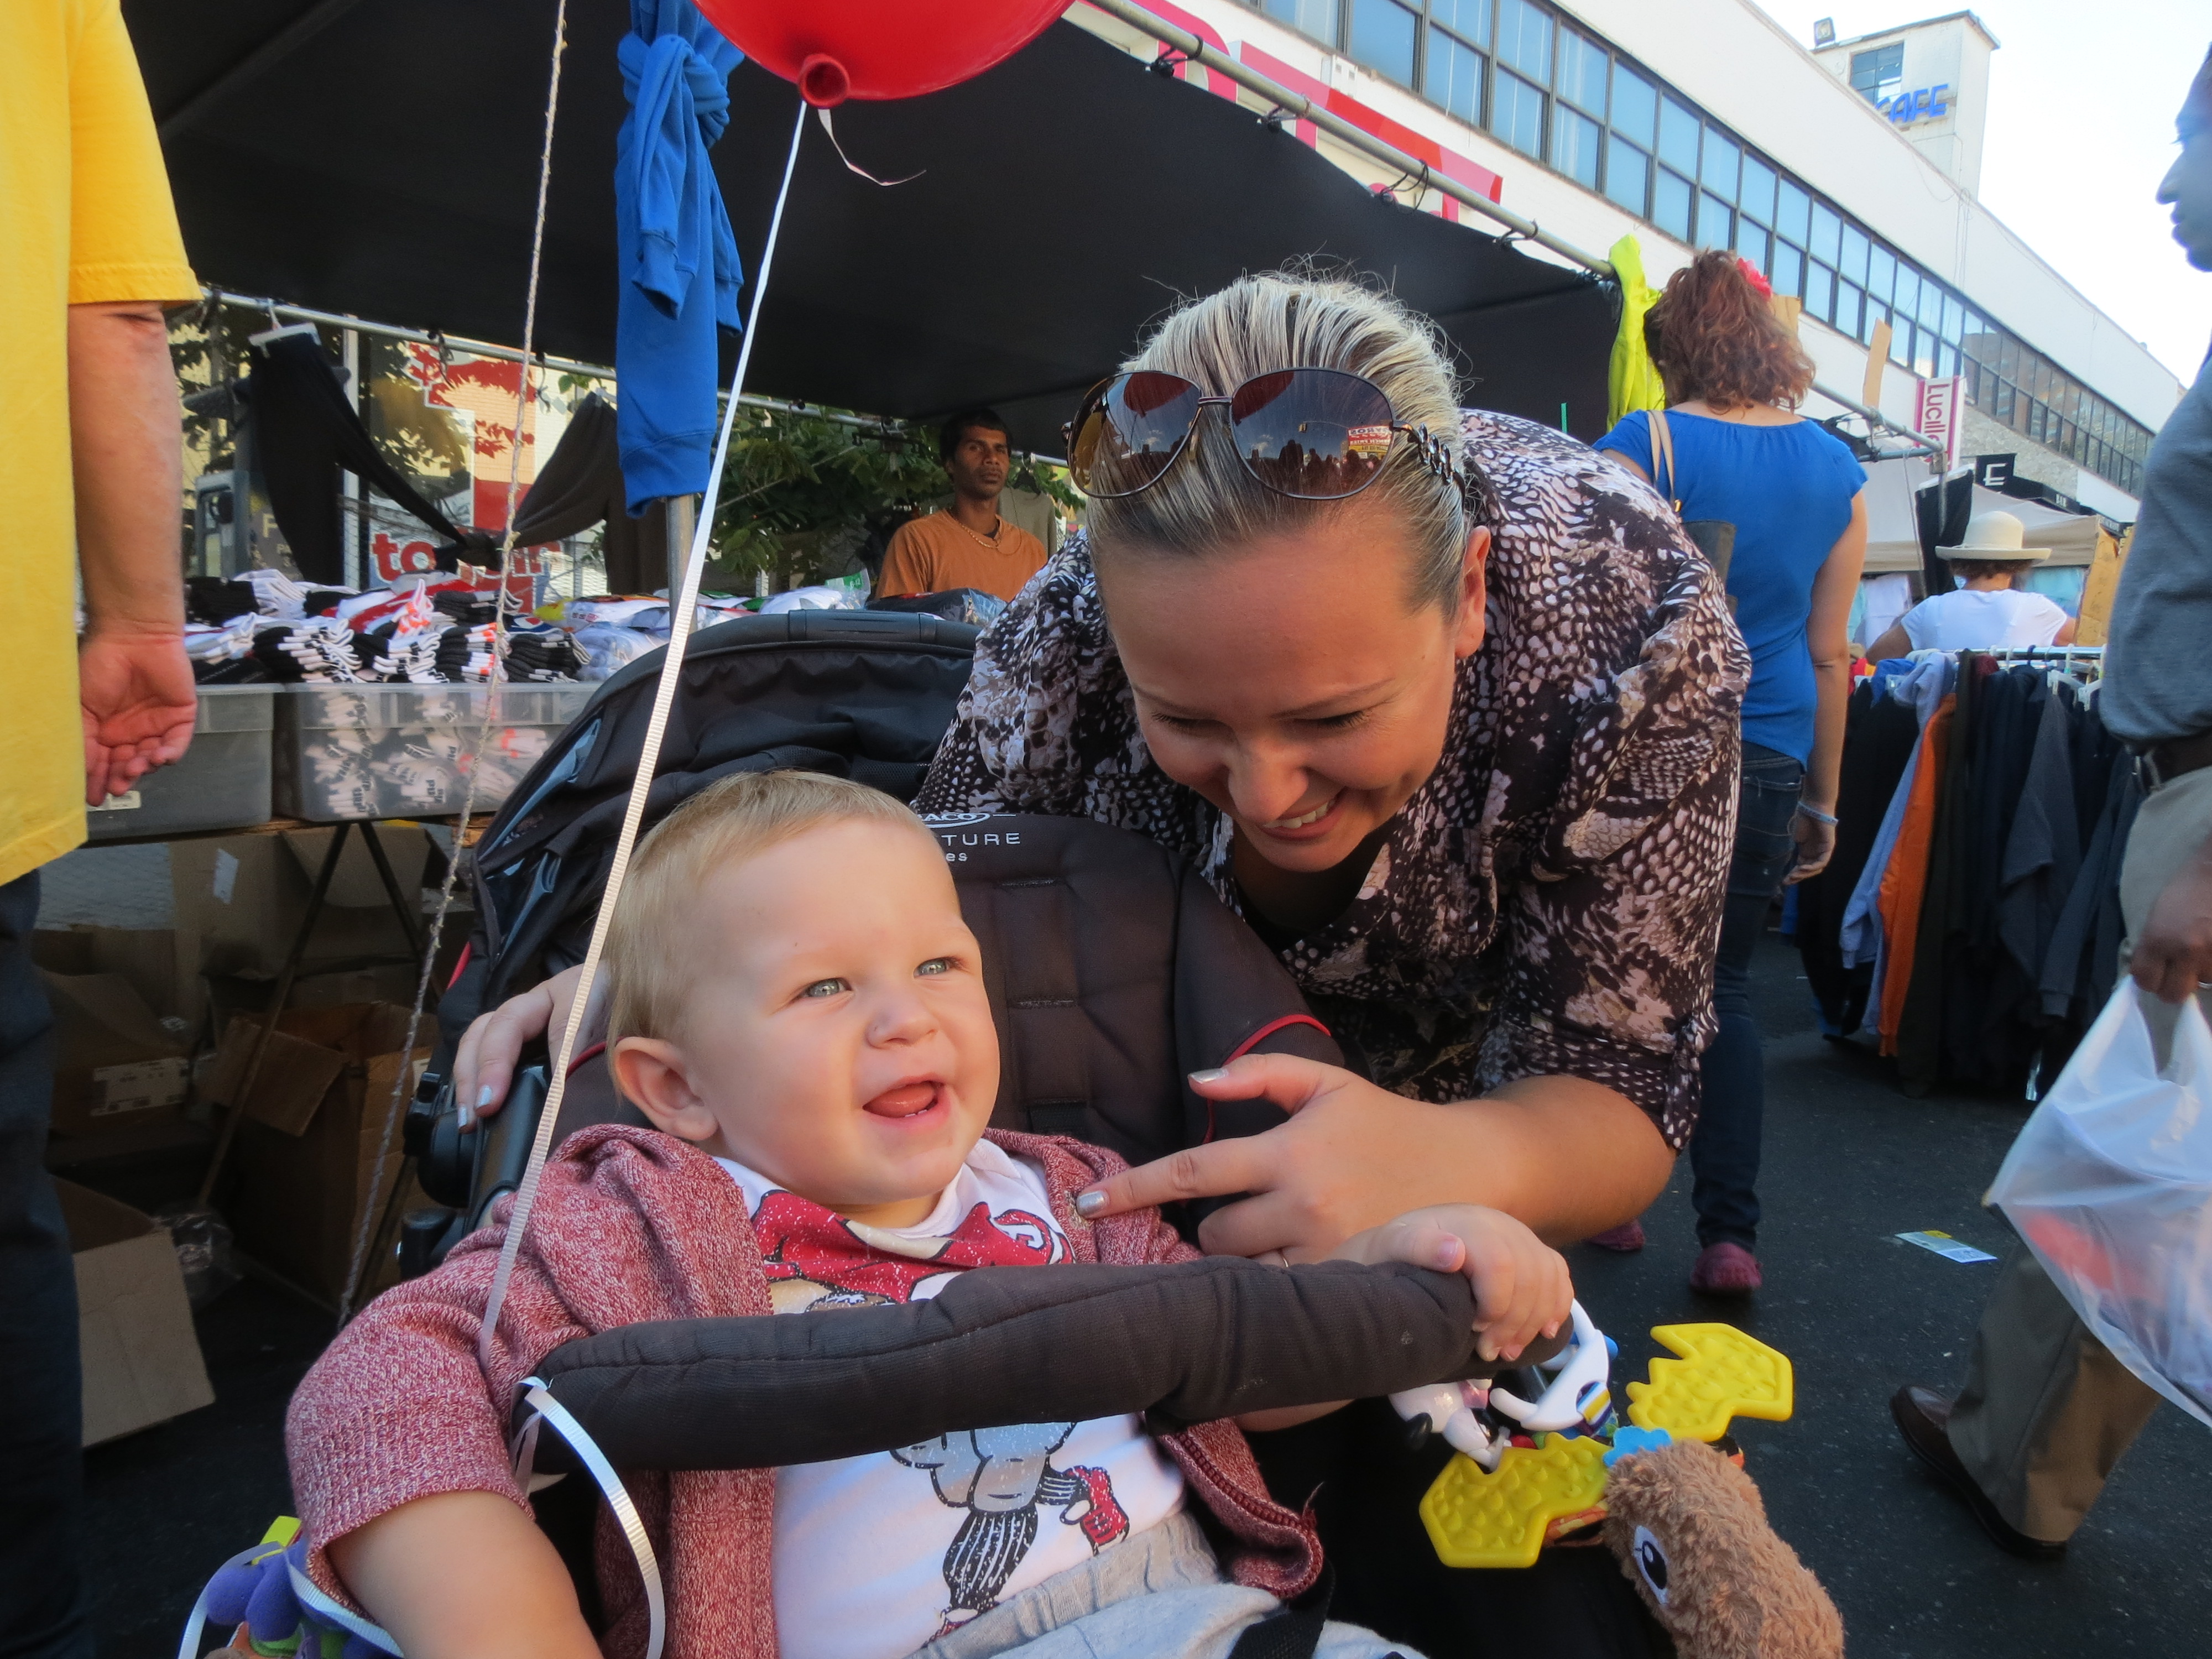 Dominic Groch, 10 months, and his mother, Paulina Balaban, have fun at the festivities.